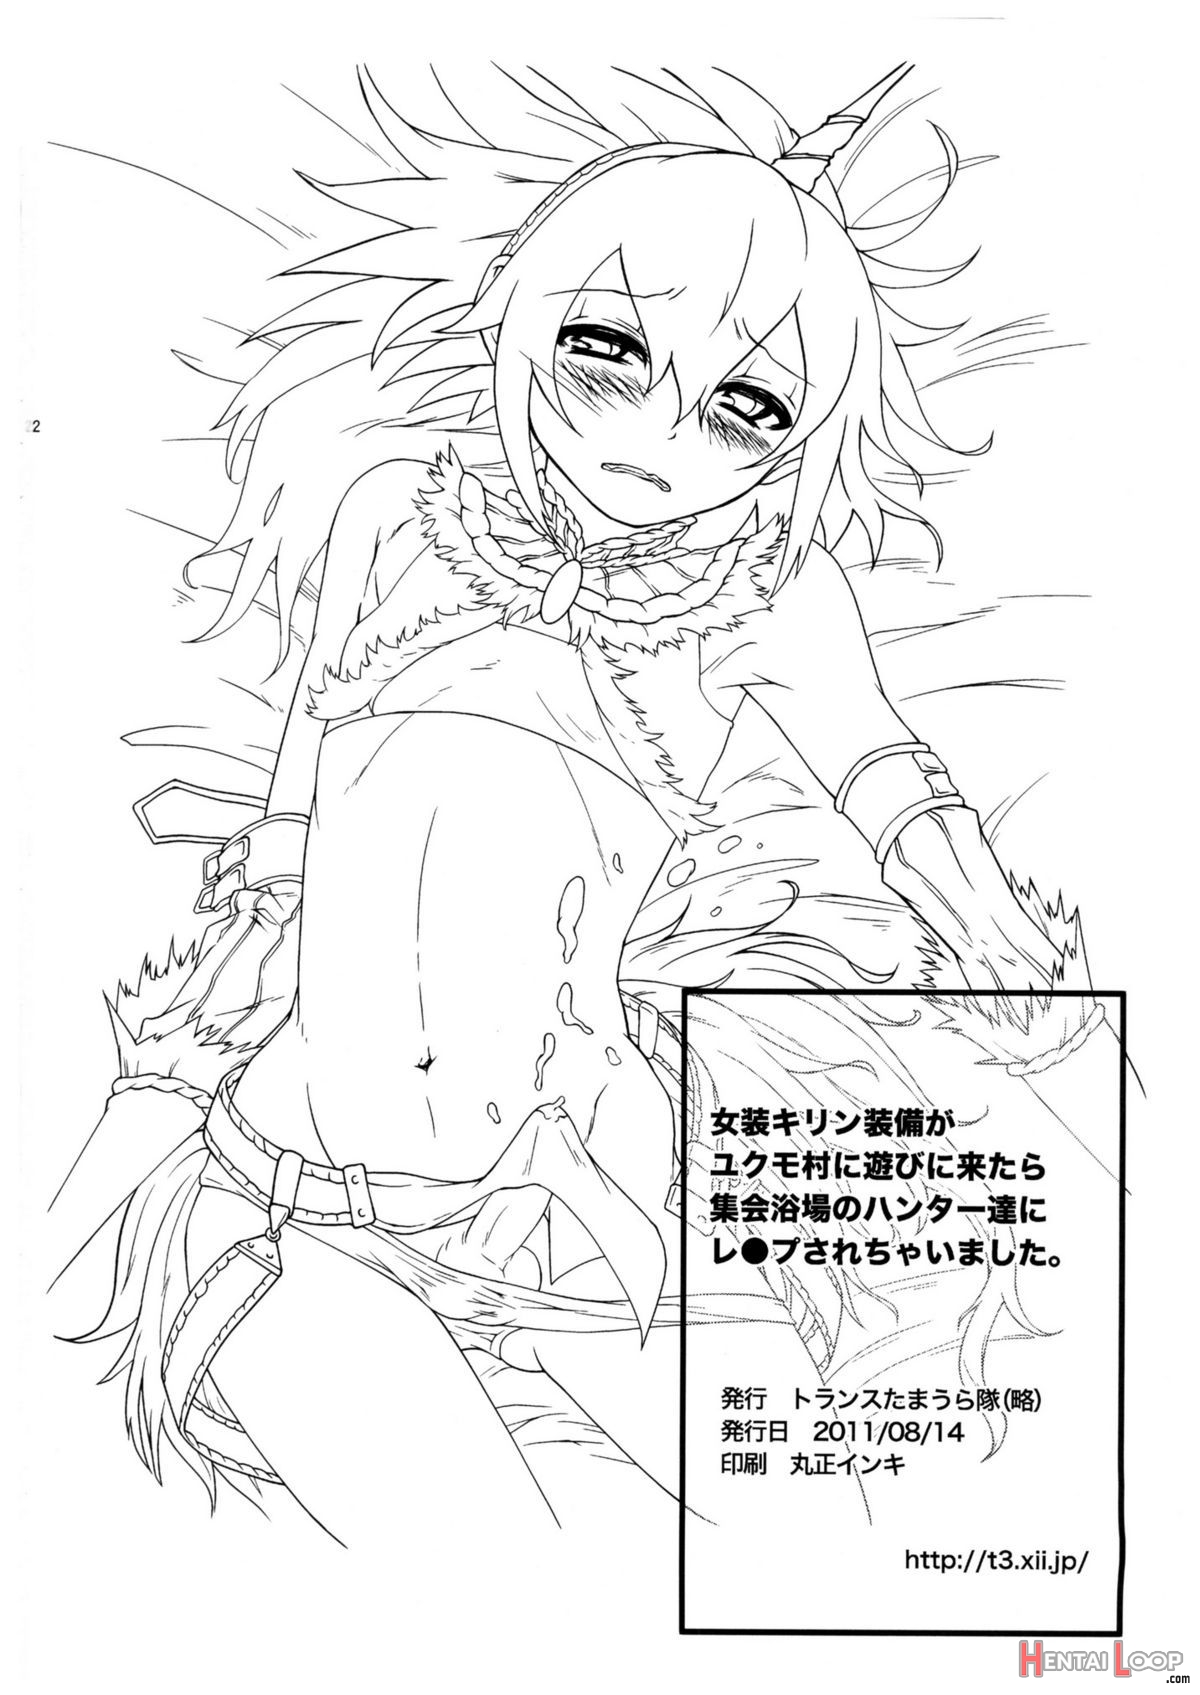 When He Came To Yukumo Village To Relax While Wearing Crossdressing Unicornarmor He Ended Up Getting Raped By Hunters At The Public Hot Springs page 22